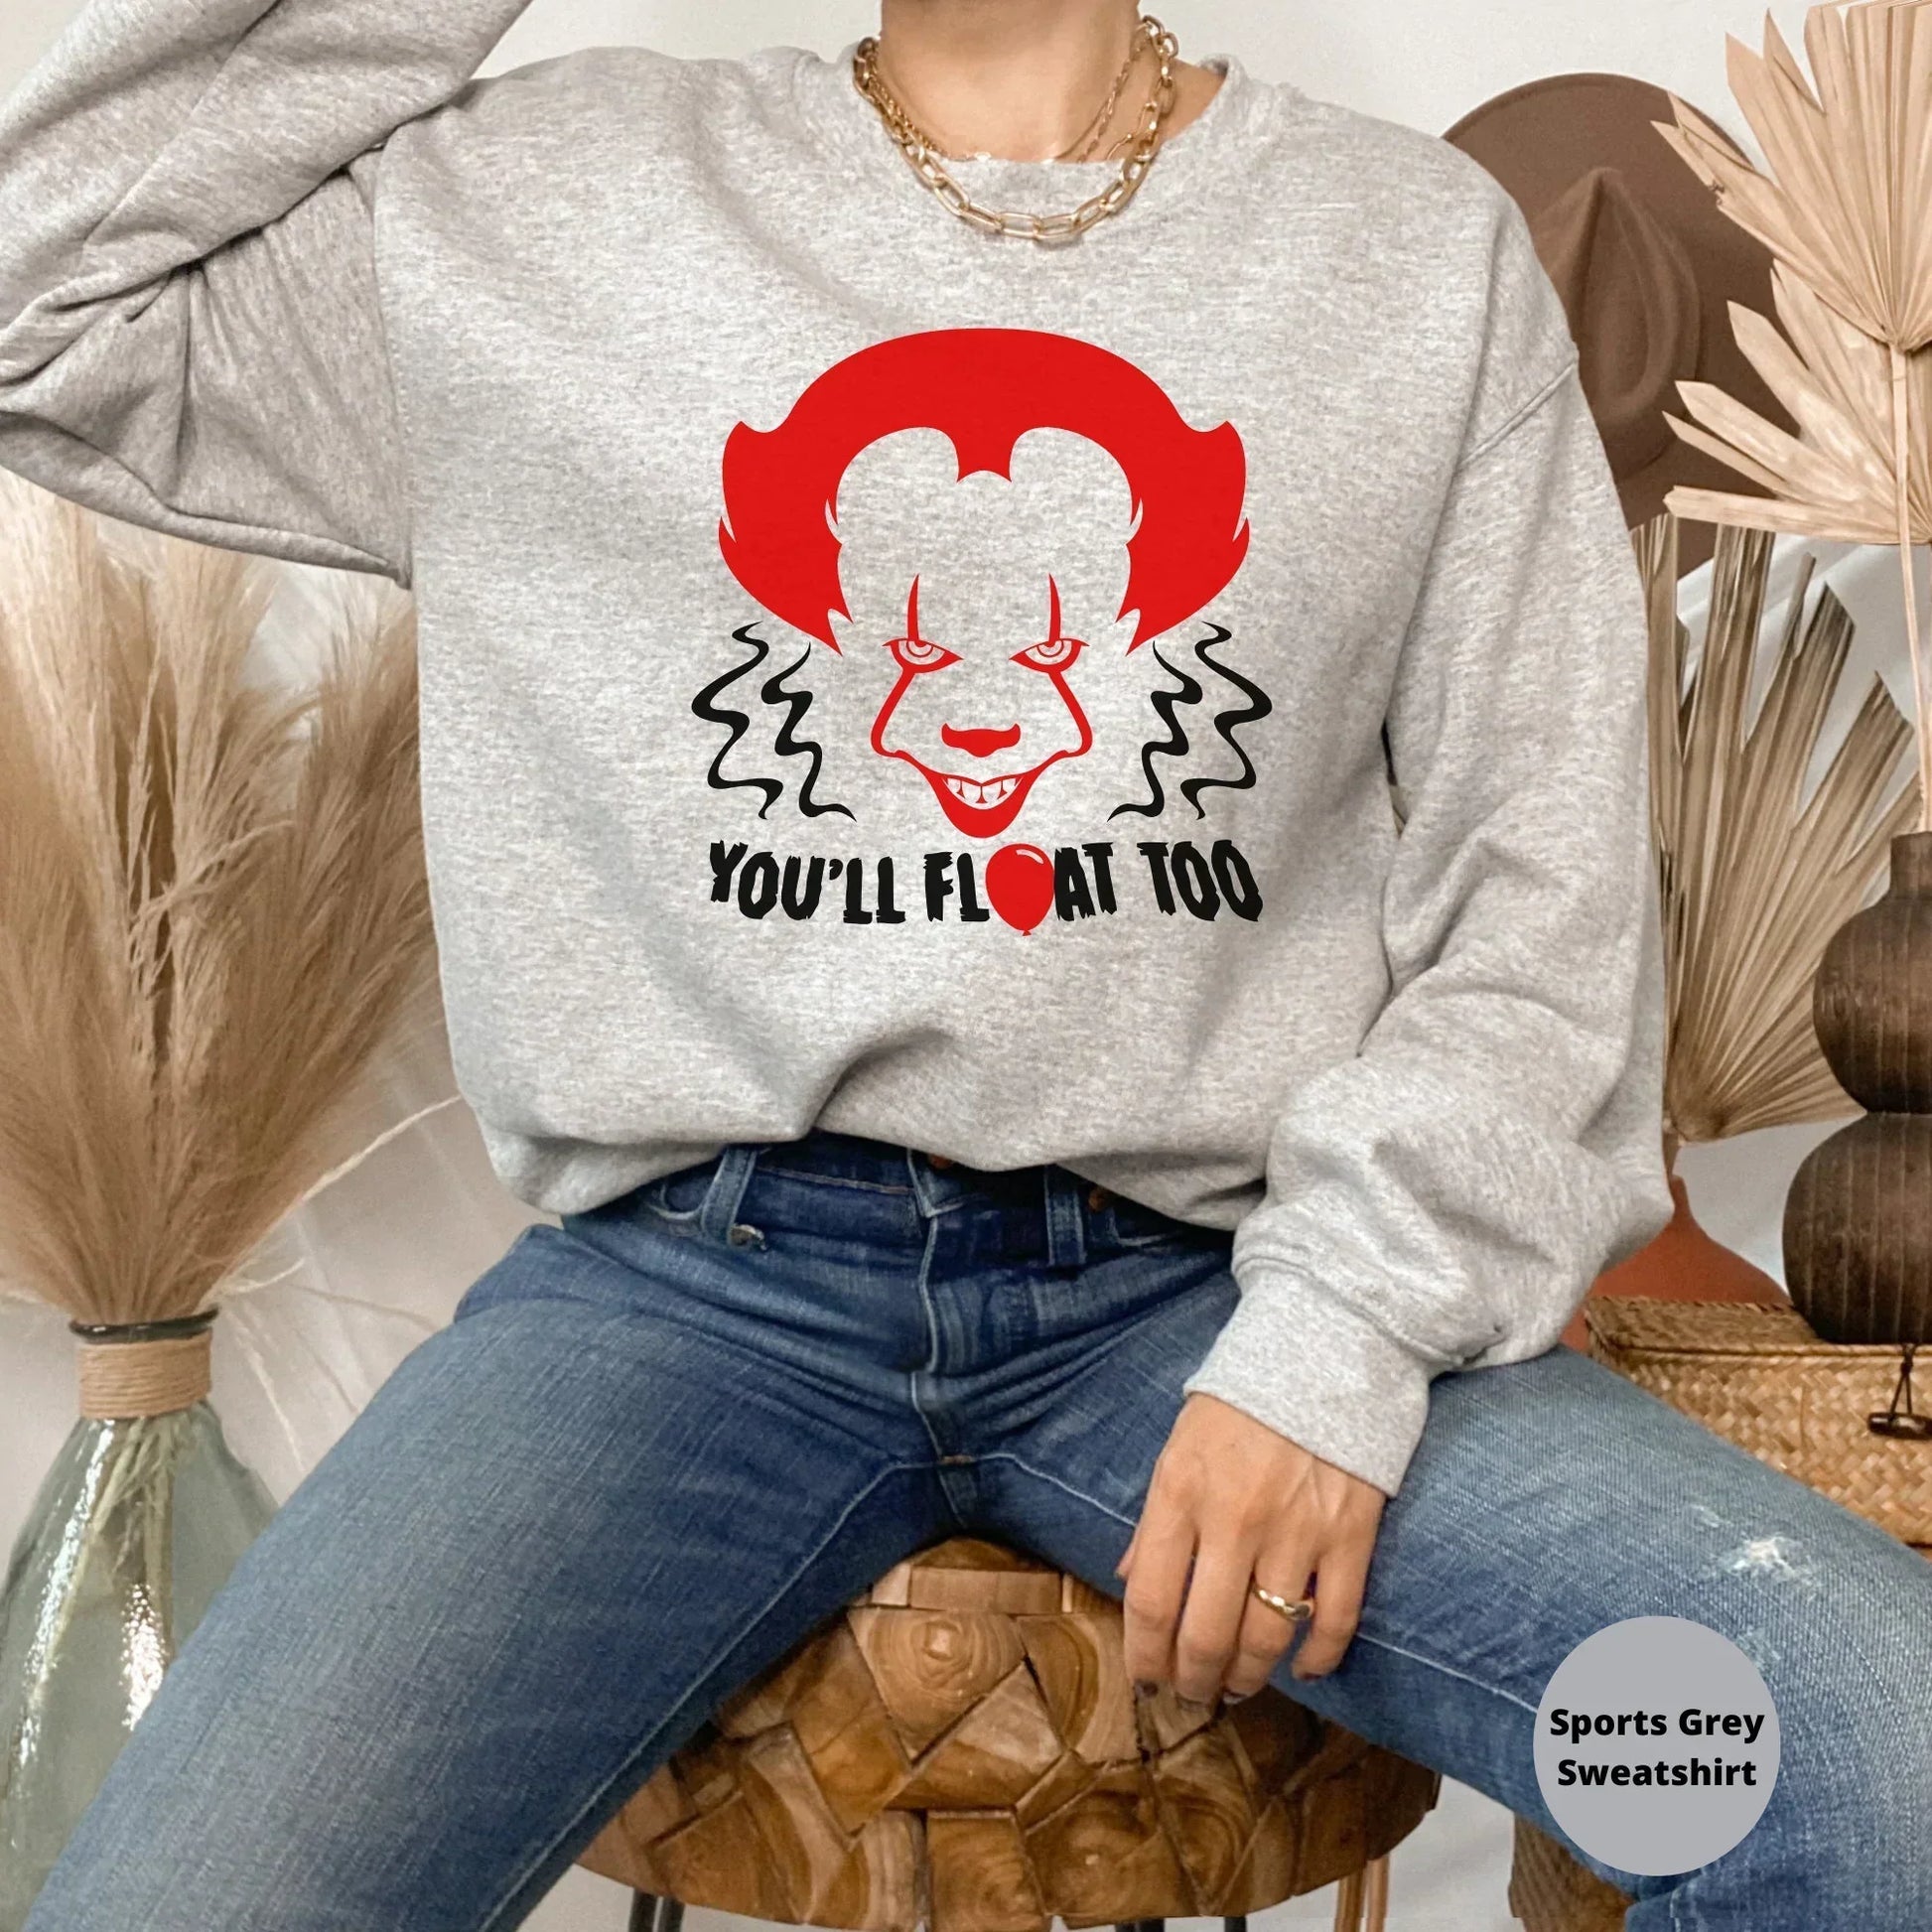 Horror Movie Sweatshirt, Pennywise Shirt, IT Tshirt, Halloween Crewneck, Trick or Treat, Cute Party T-Shirt, Gift for Her, Gift for Him HMDesignStudioUS